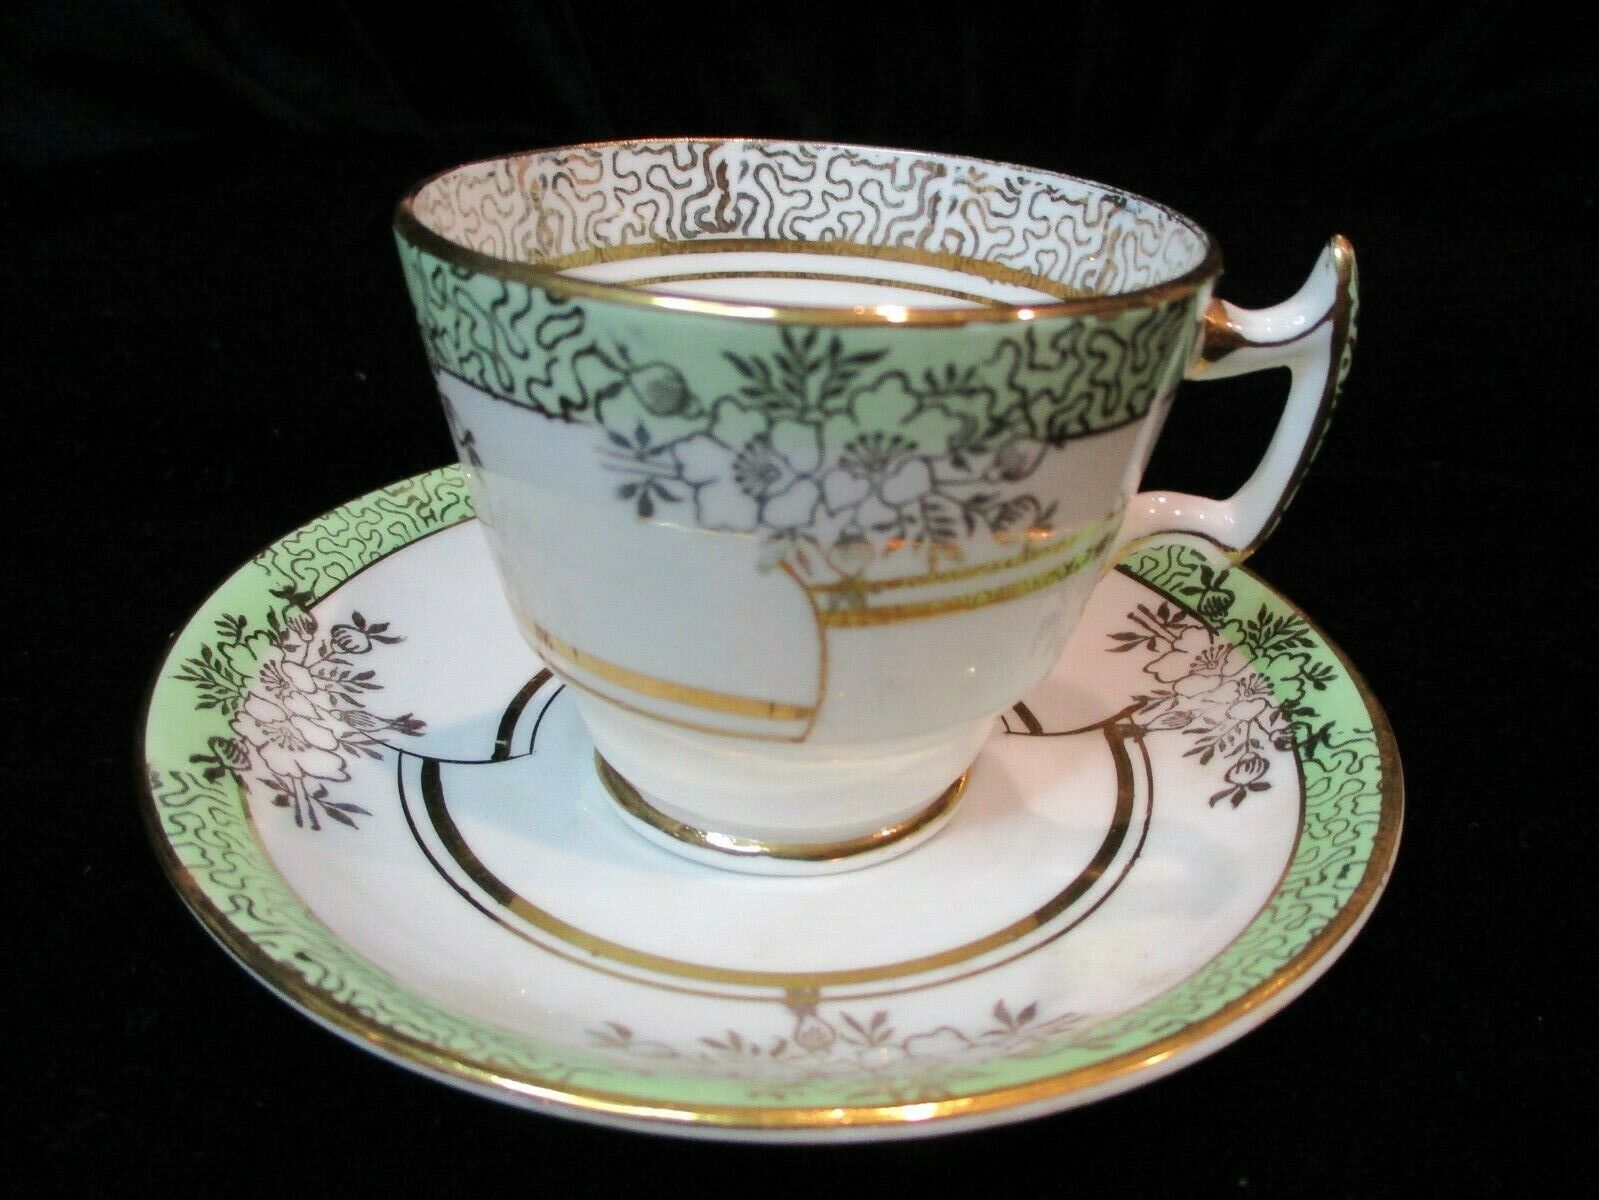 PHOENIX BONE CHINA TF & S LTD ENGLAND GOLD FLOWERS DEMITASSE FOOTED CUP & SAUCER